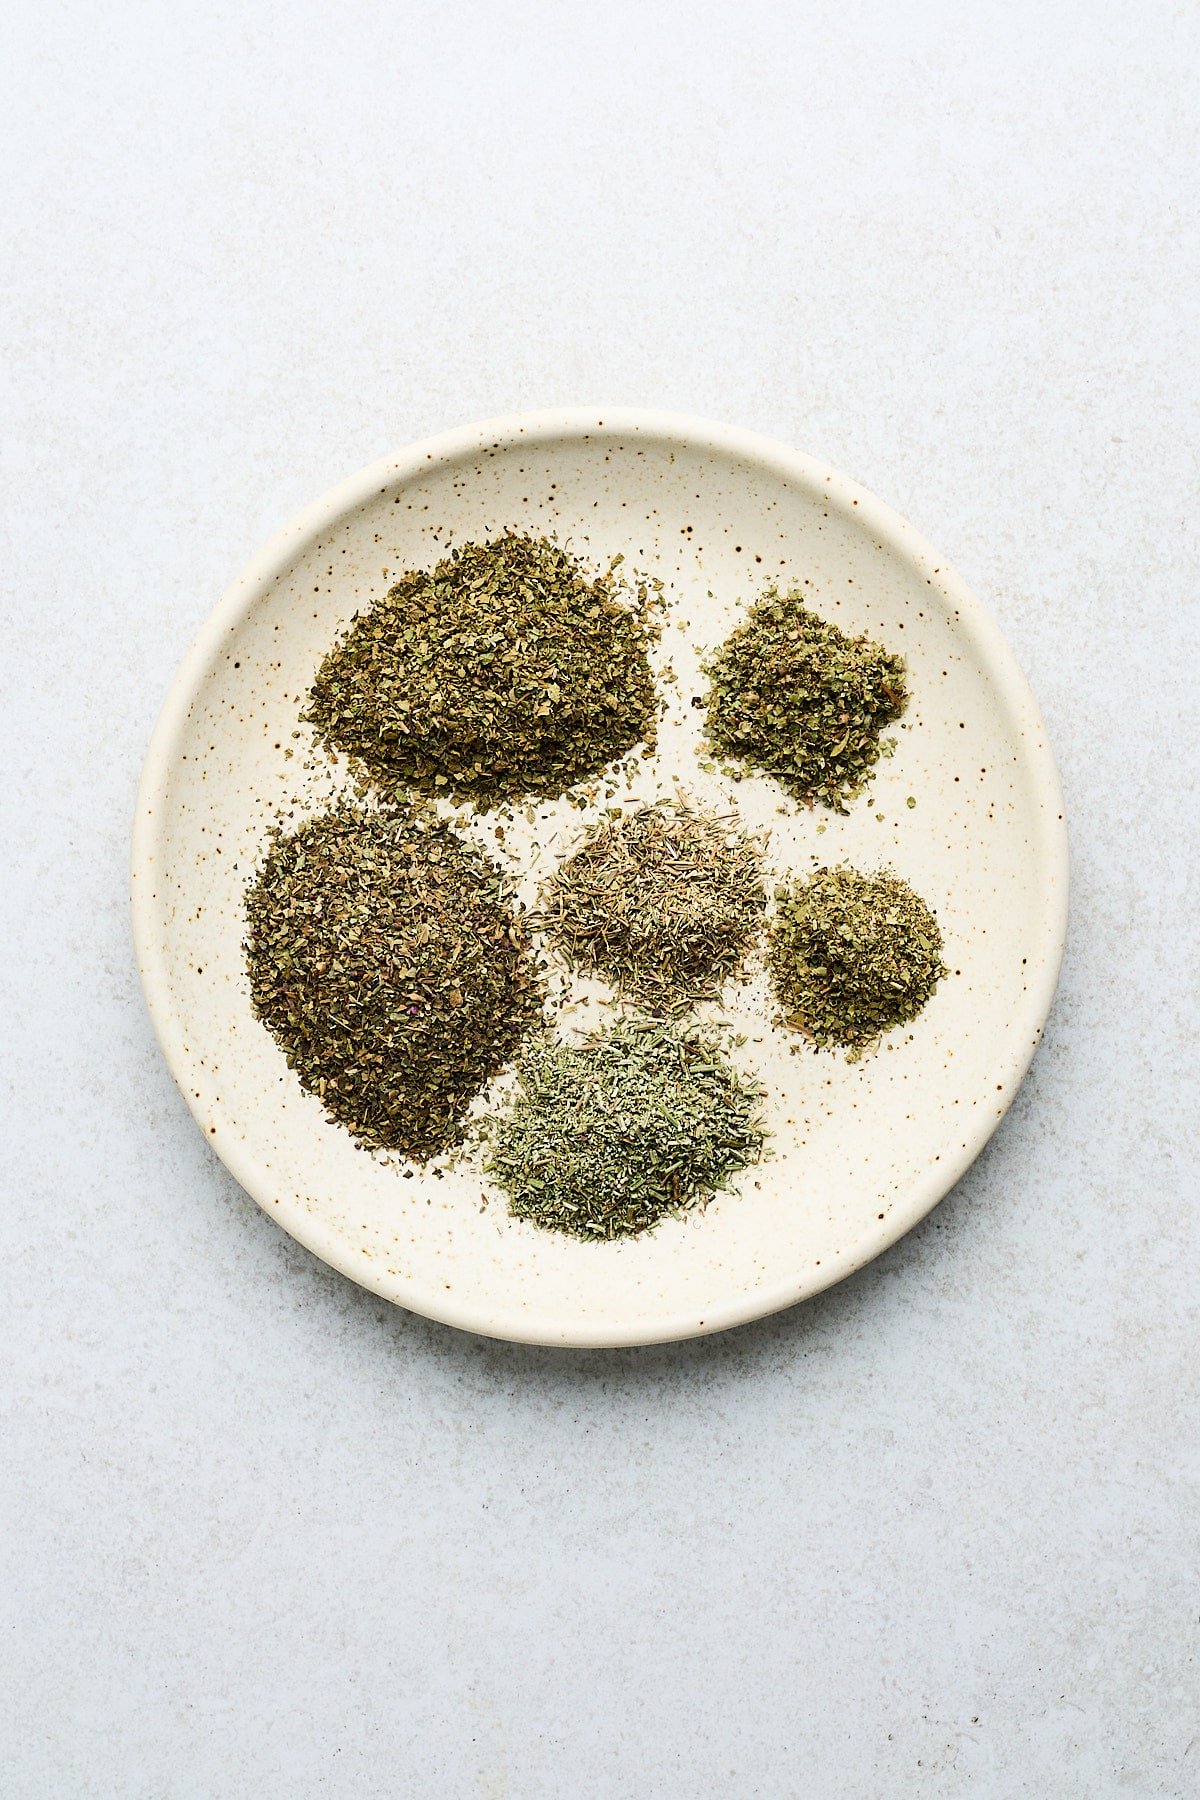 Herbs on a plate.